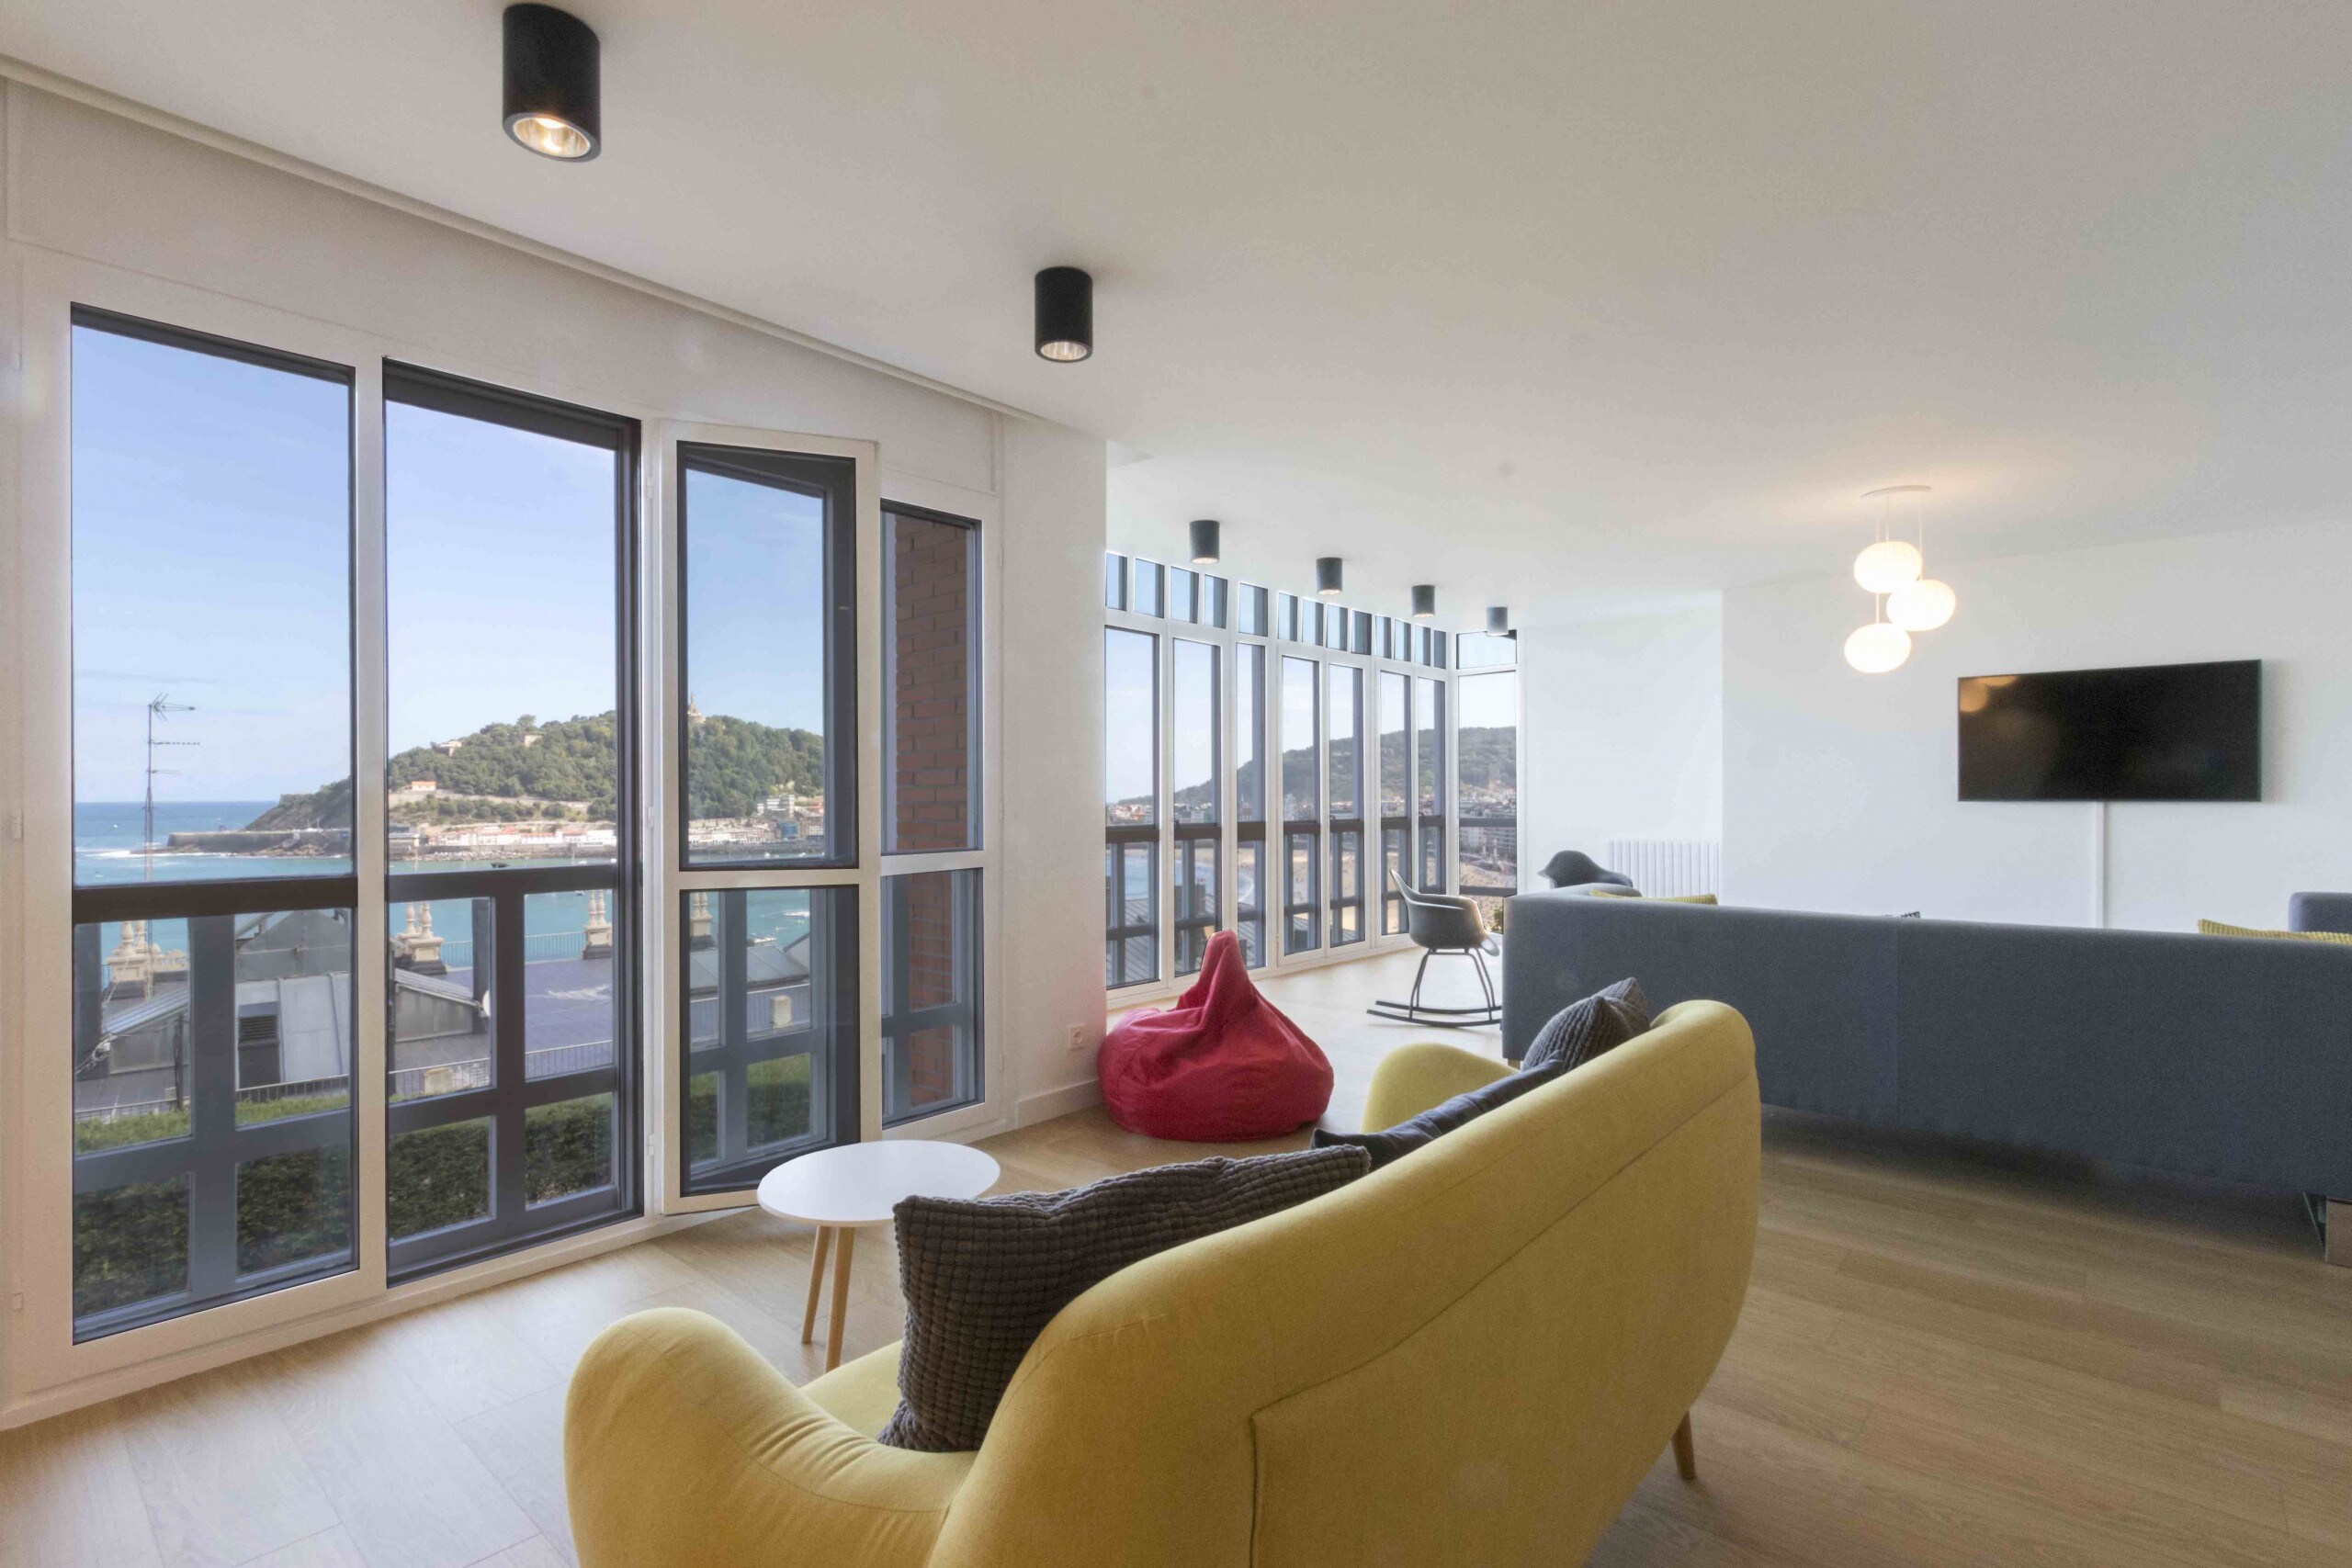 Property Image 2 - Three Bedrooms Apartment with a Panoramic View to La Concha Bay